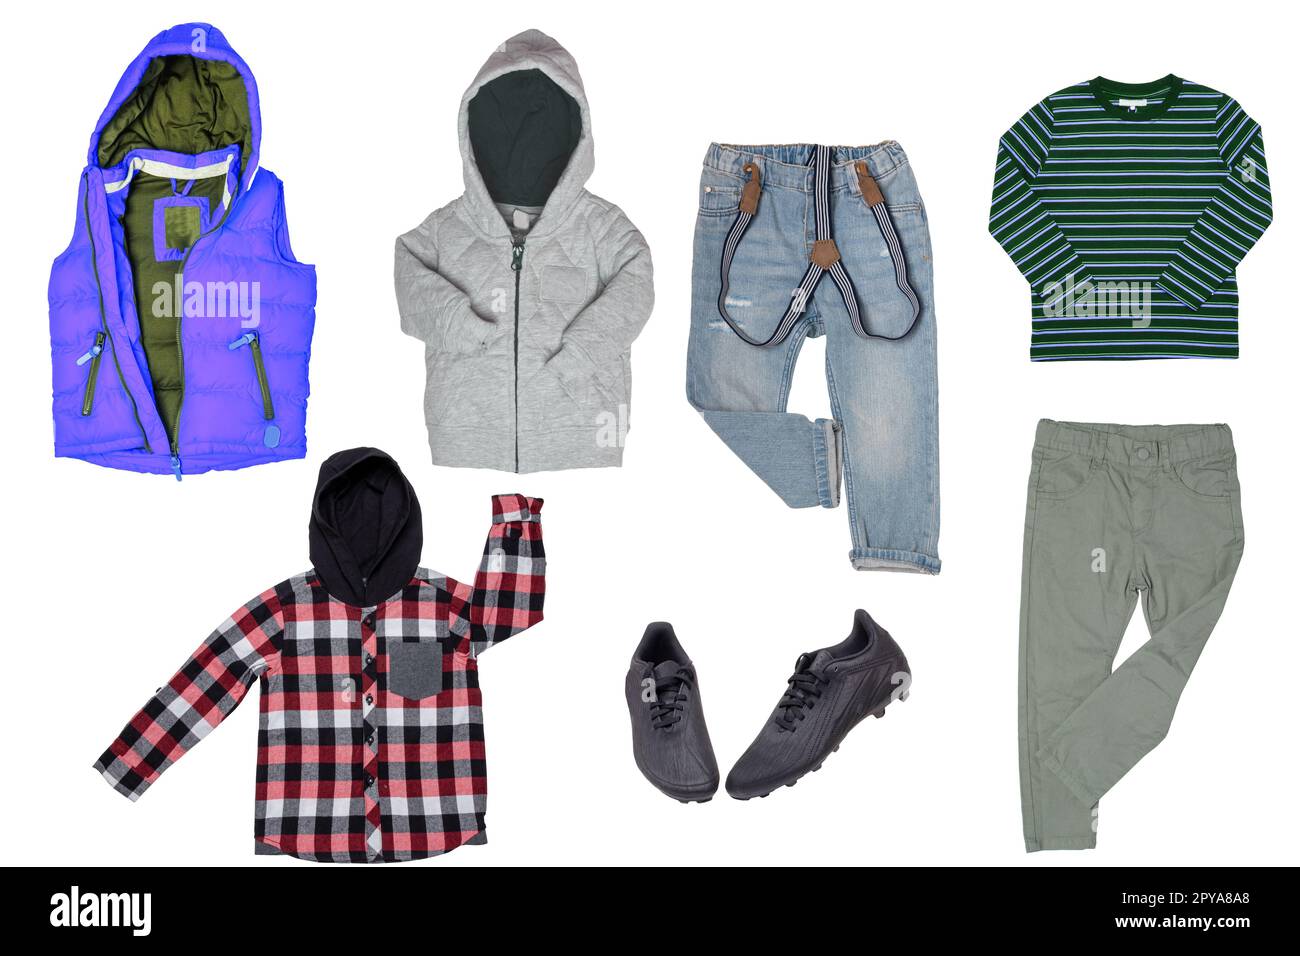 Collage set of boys spring winter clothes isolated. Male kids apparel collection. Child boy fashion clothing outfit. Colorful stylish jeans, sweater, pants, jackets, shoes wearing. Stock Photo